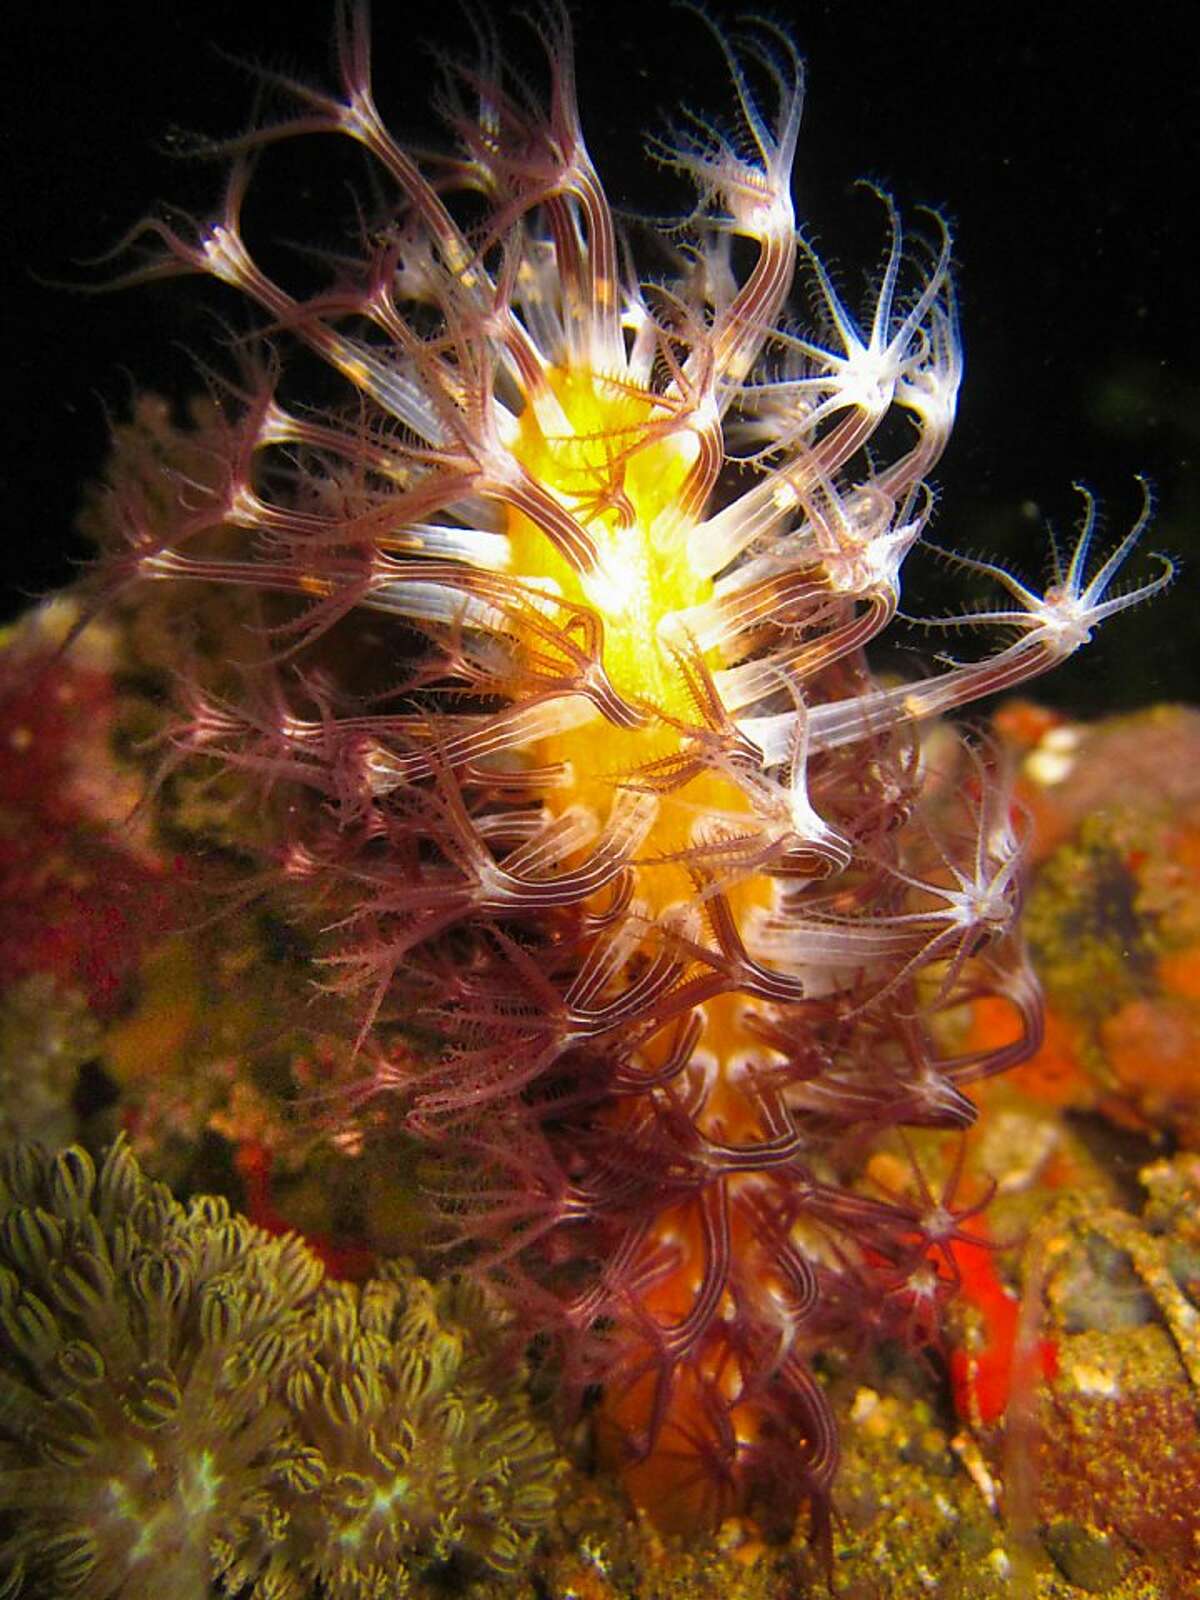 A colorful new species of the sea pen genus Veretillum. The animal is only seen at night, when it emerges from the sand and extends the star-like polyps to feed on microscopic plankton in the water.